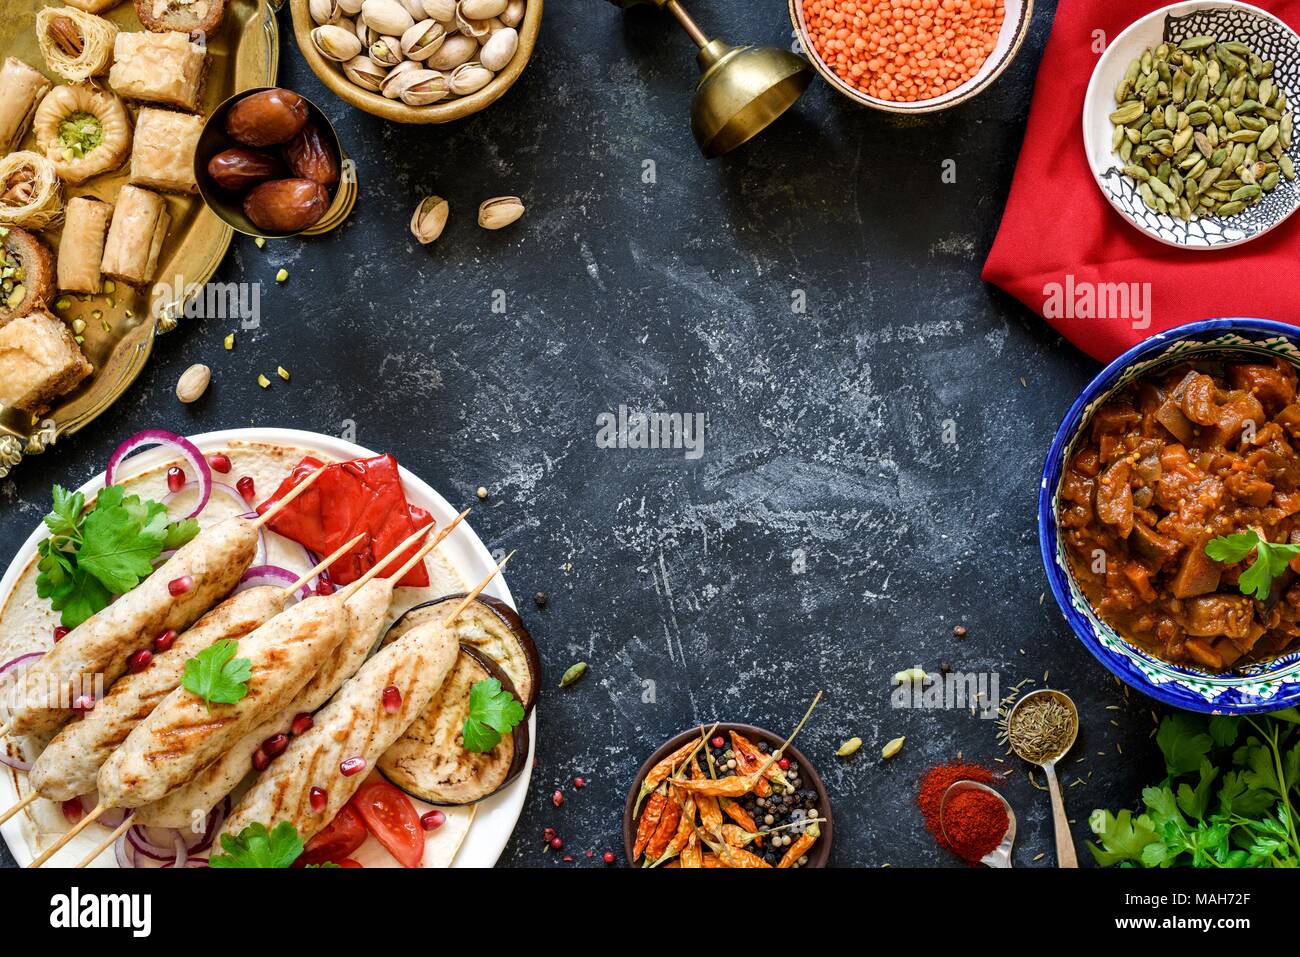 Turkish or arabic cuisine. Turkish food on dark stone background, top view with copy space for text. Kebab, baklava, imam bayildi, spices and nuts Stock Photo